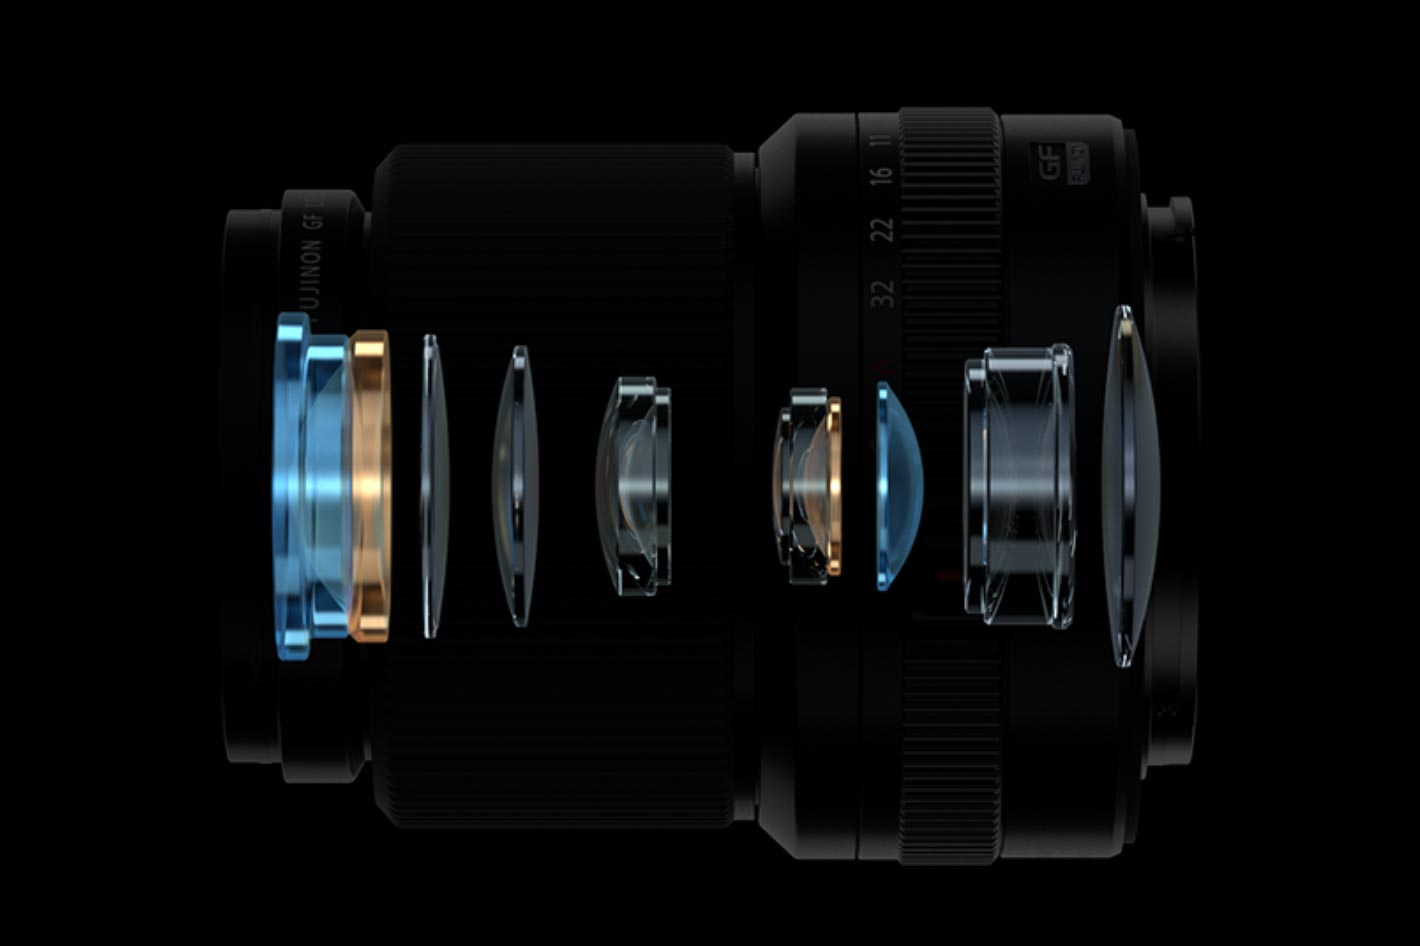 FUJINON GF30mmF3.5 R WR: a wide-angle for stills and video